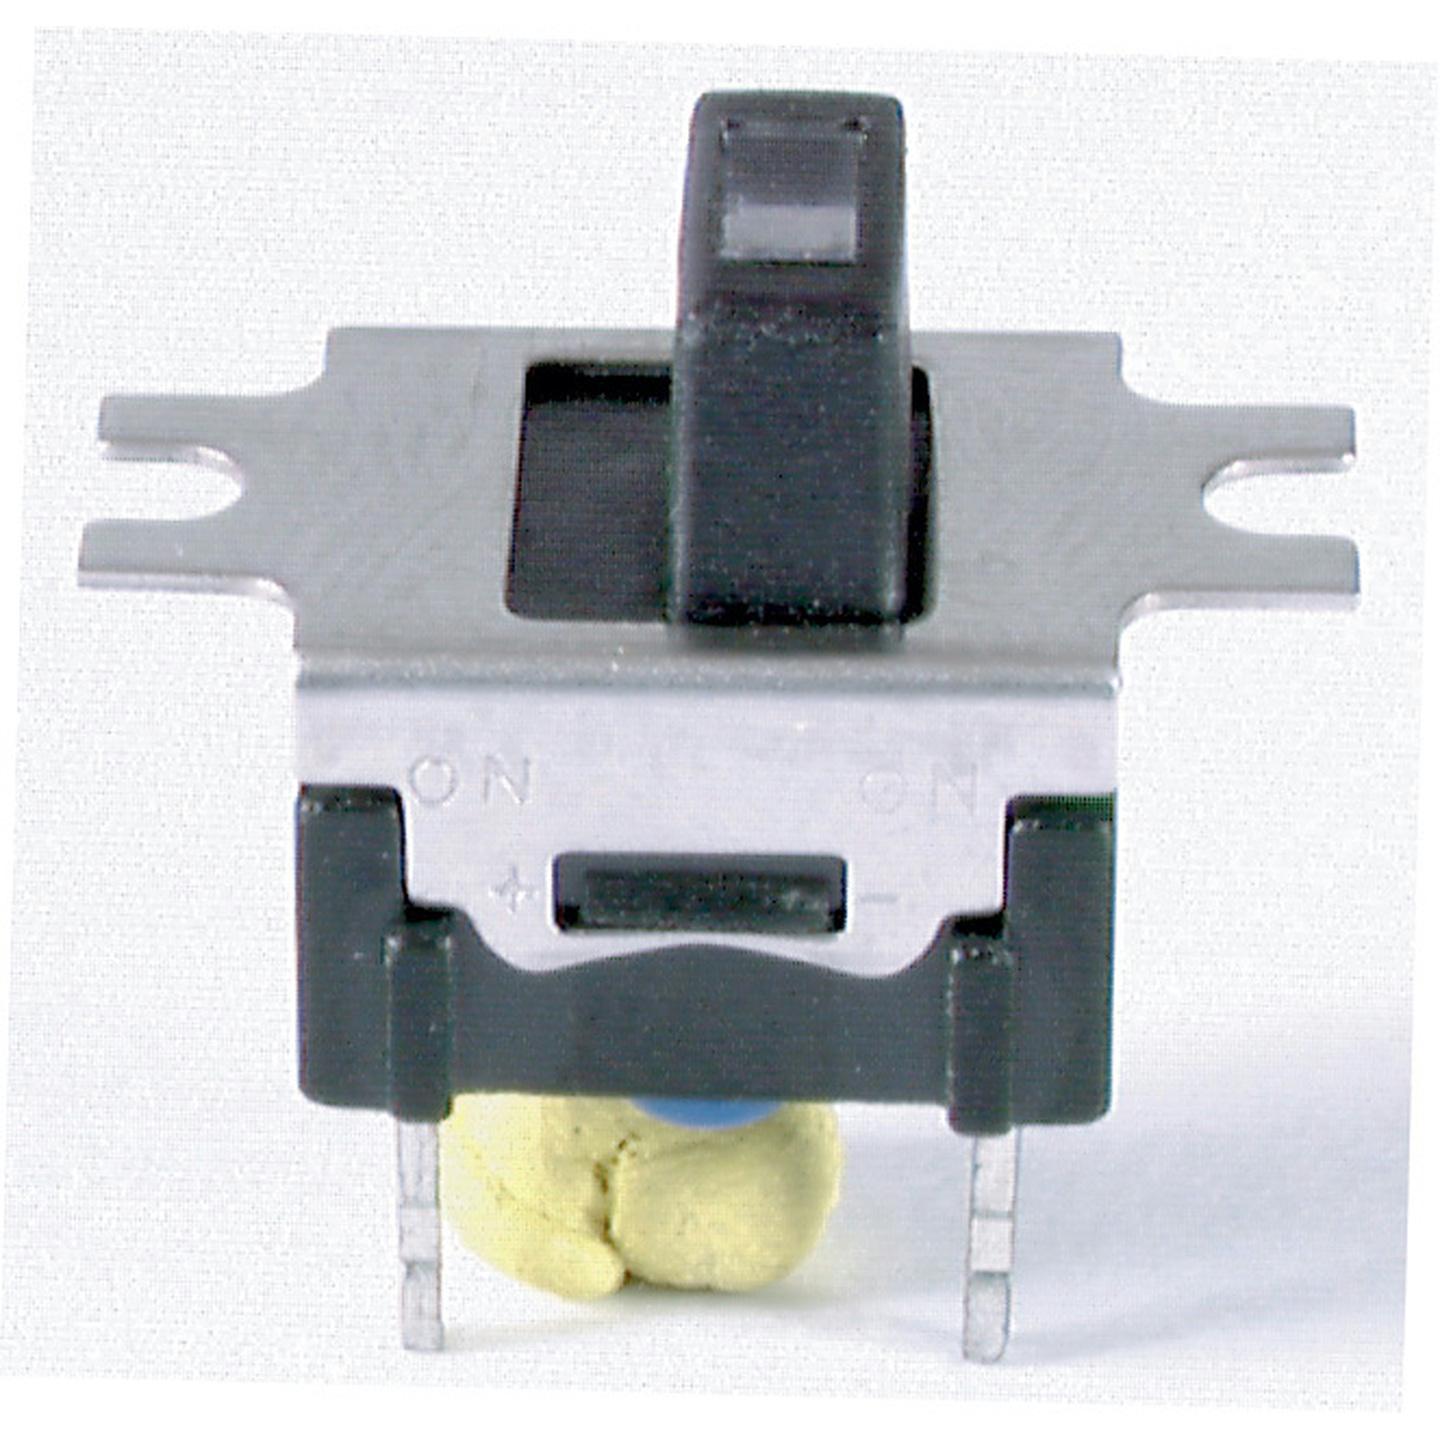 SPDT Slide Switch with LED Illumination in Actuator